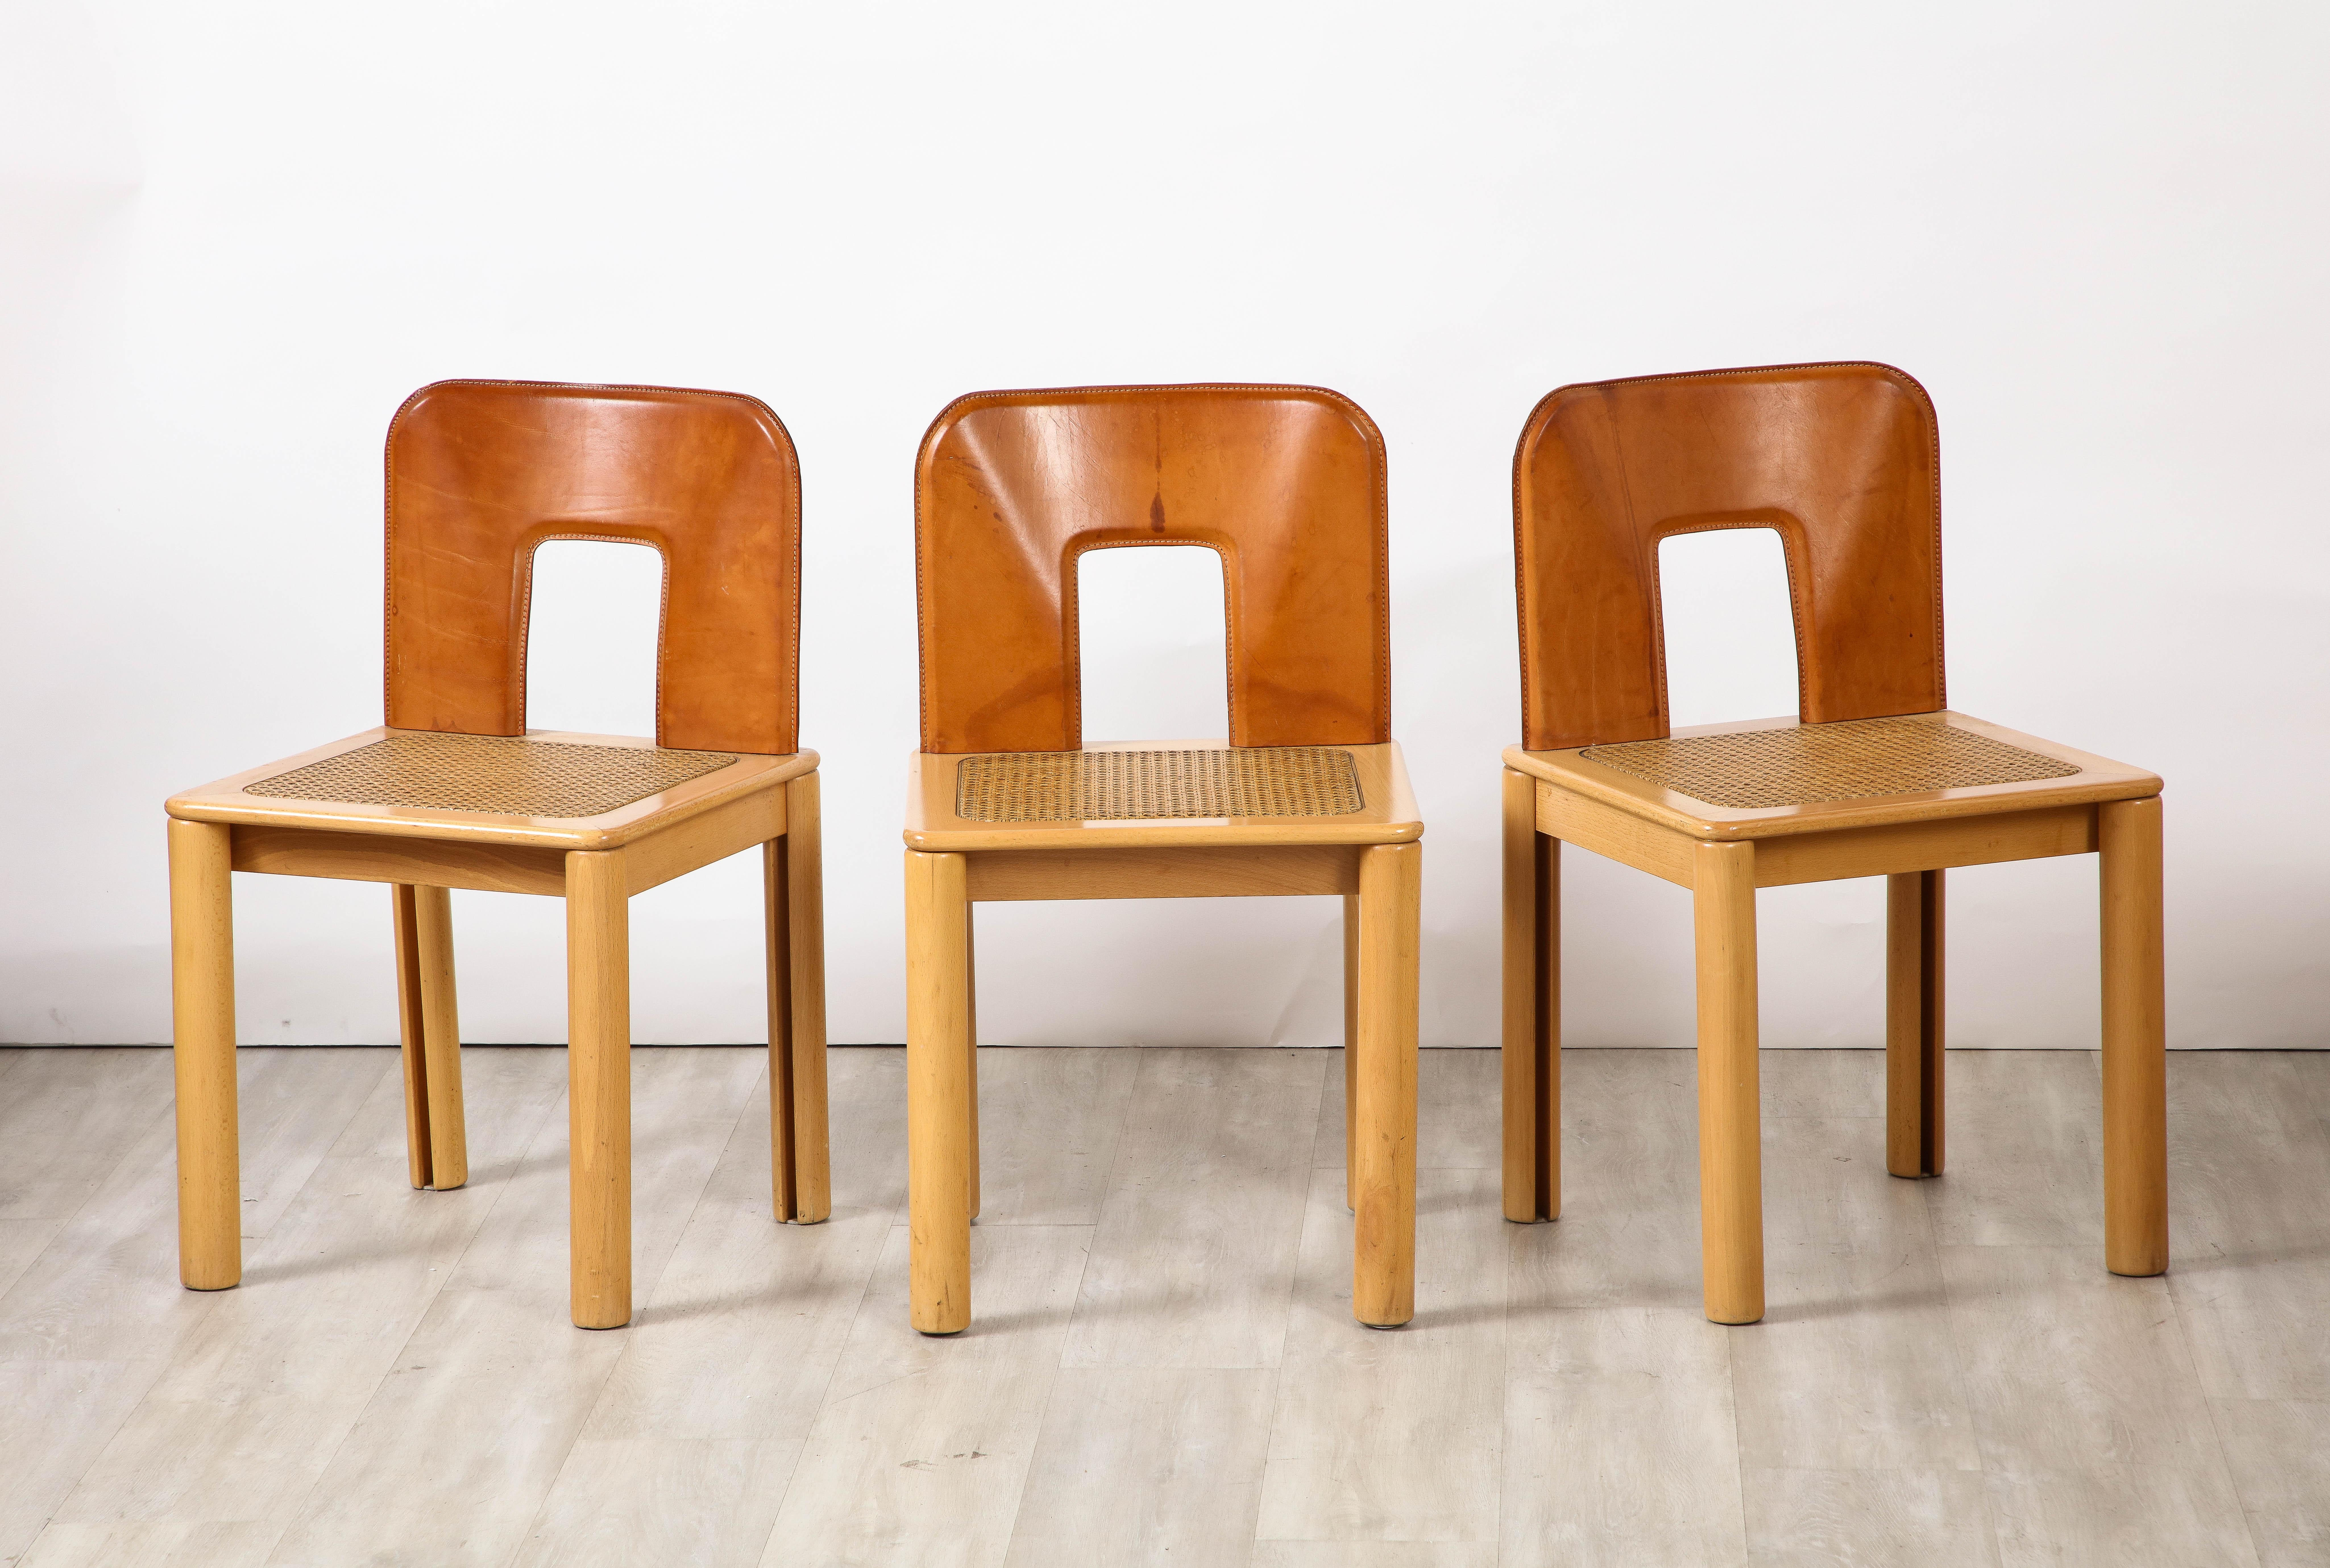 Italian 1970's Dining Chairs with Leather, Wood, Cane Seats, Italy, circa 1970 For Sale 3